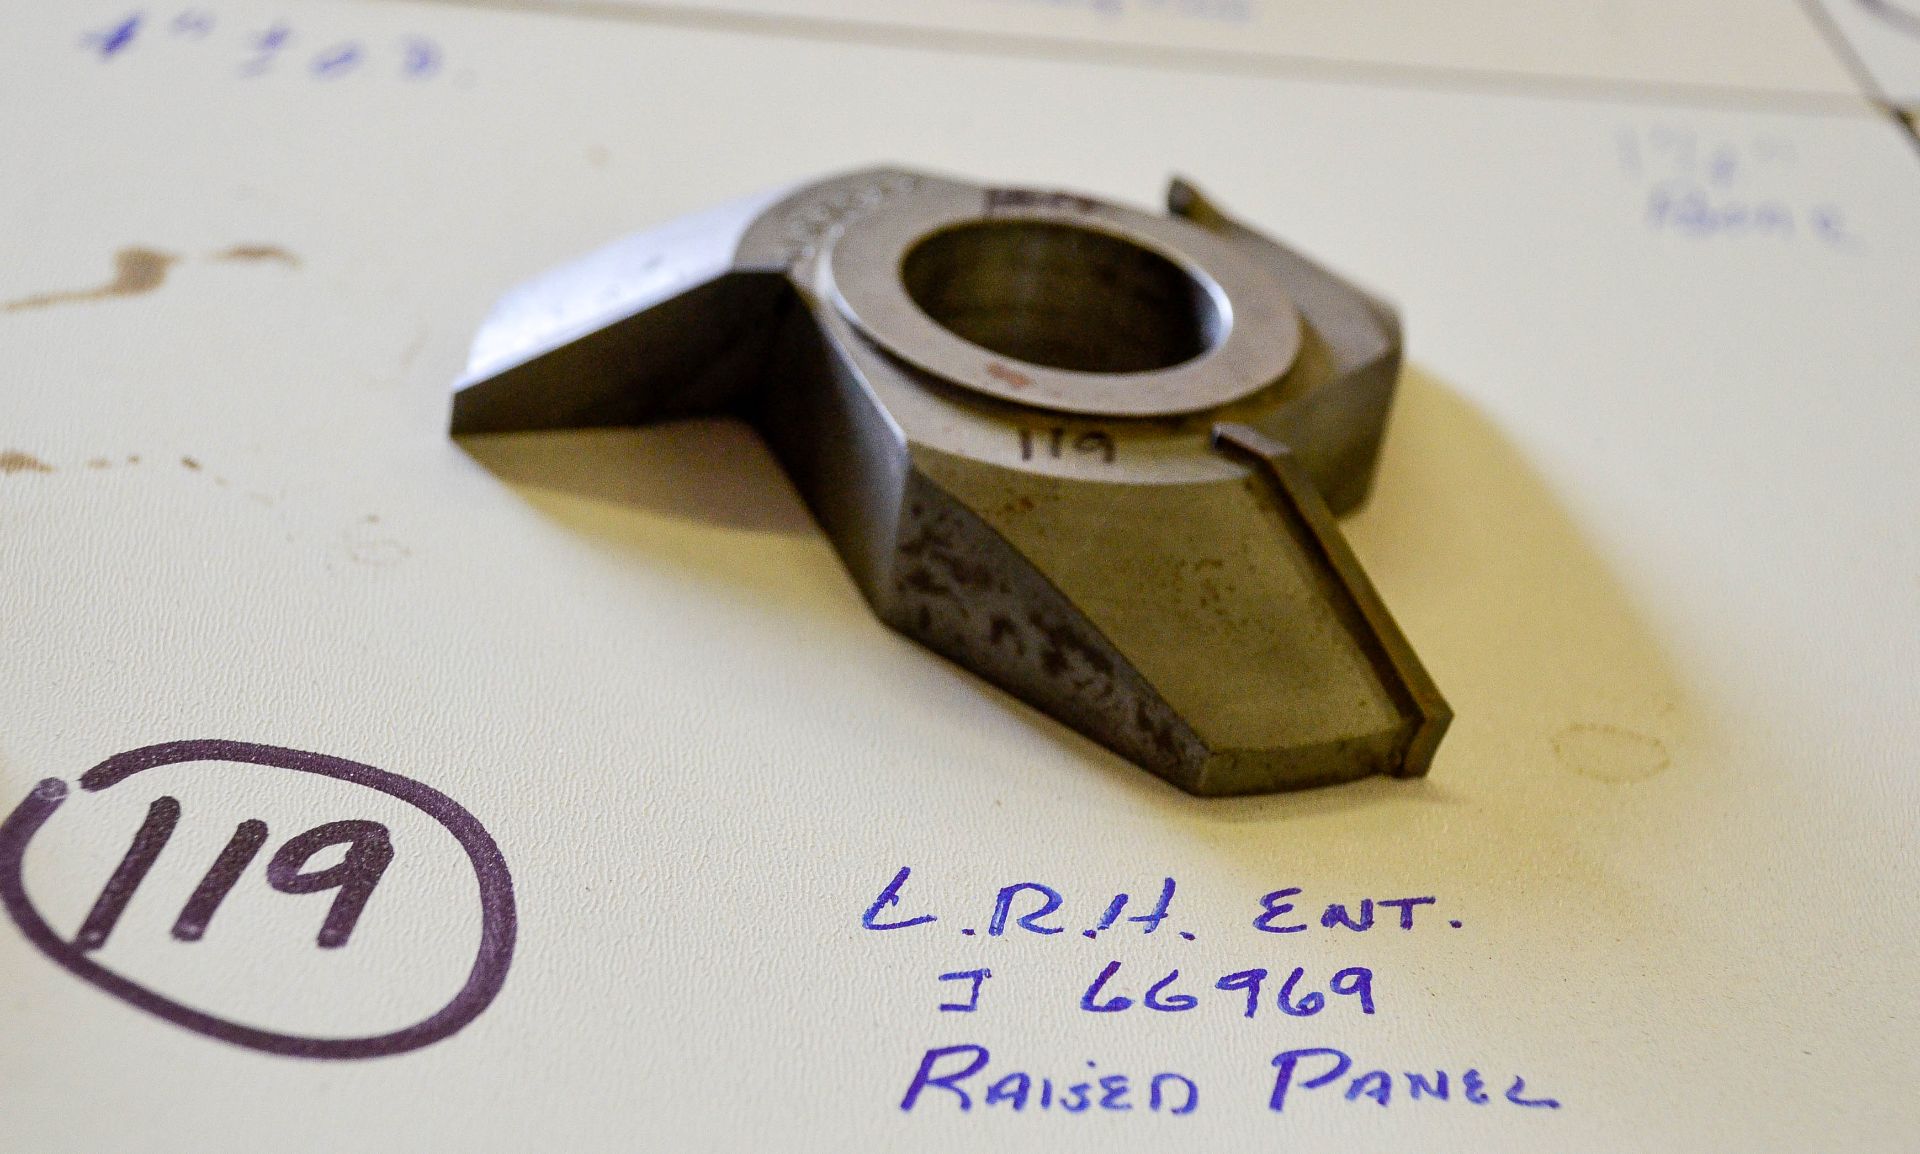 Shaper Cutter, L.H.R. ENT., J 6696, Raised Panel Cutter, 4" Outside Diameter, 1-1/4" Bore, See - Image 2 of 2